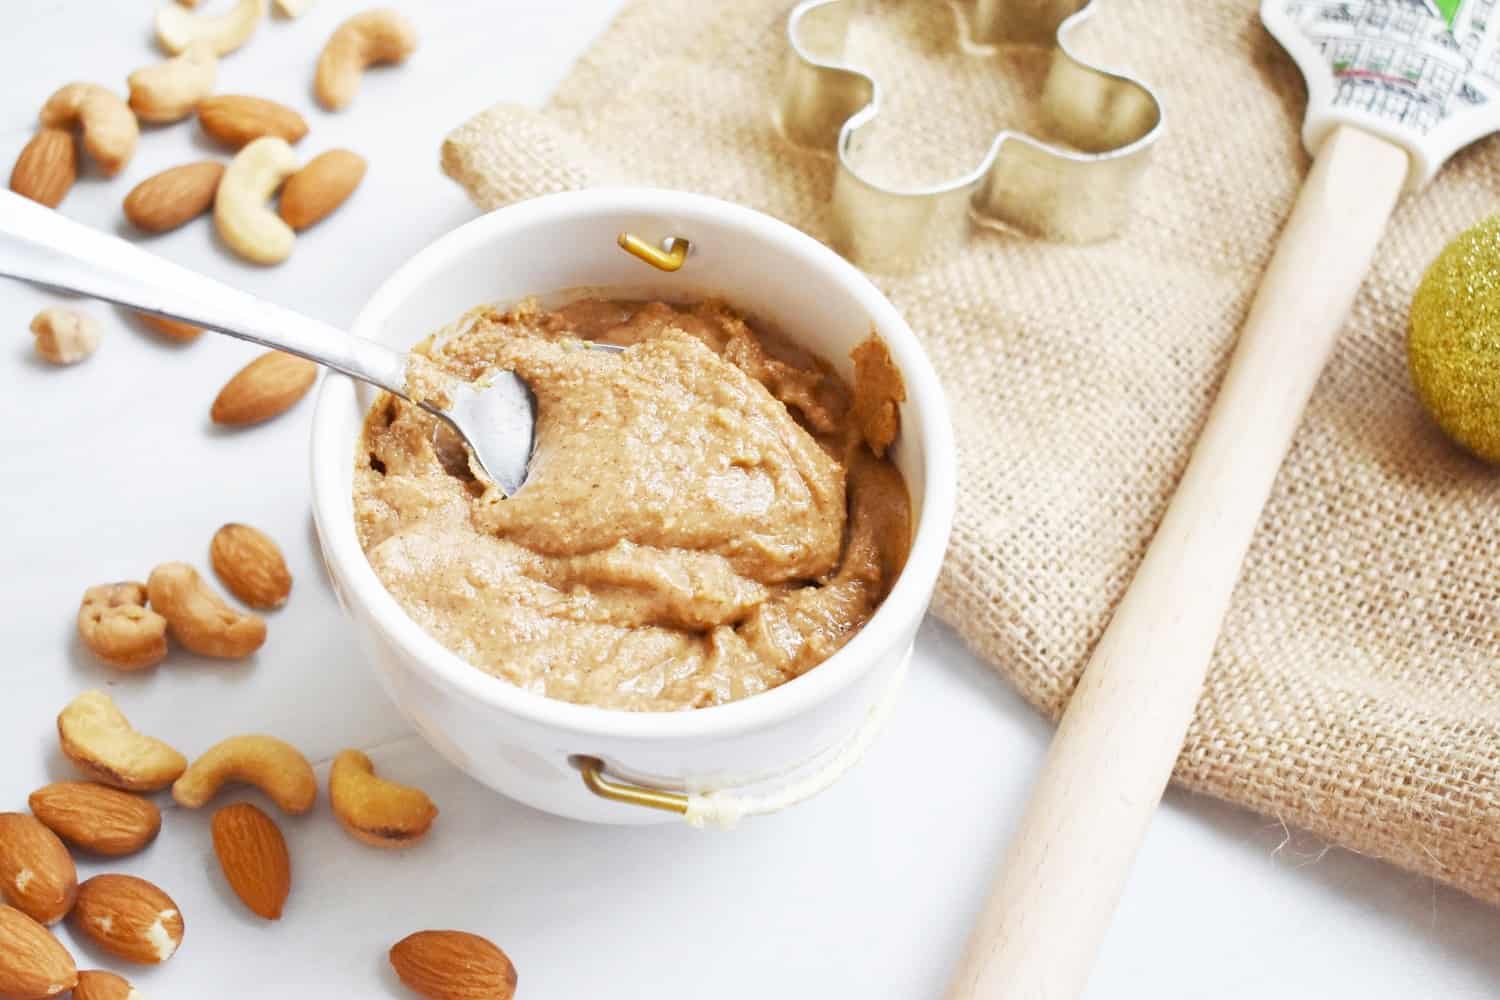 A small bowl of gingerbread nut butter with a spoon in it, next to some almonds and cashews.